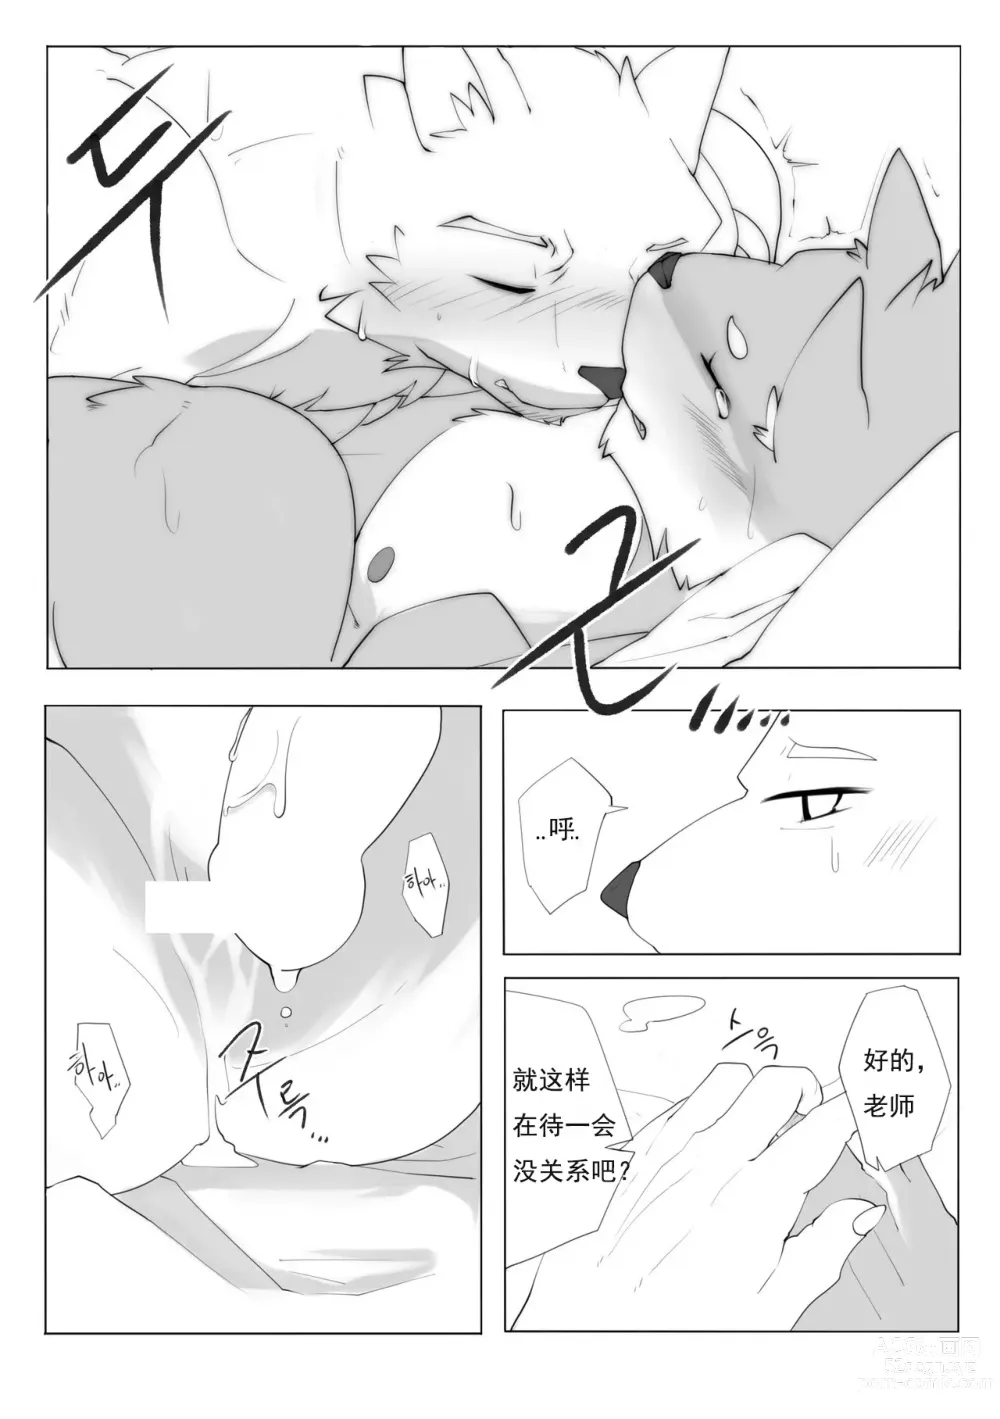 Page 29 of doujinshi 单恋 （工口译制）